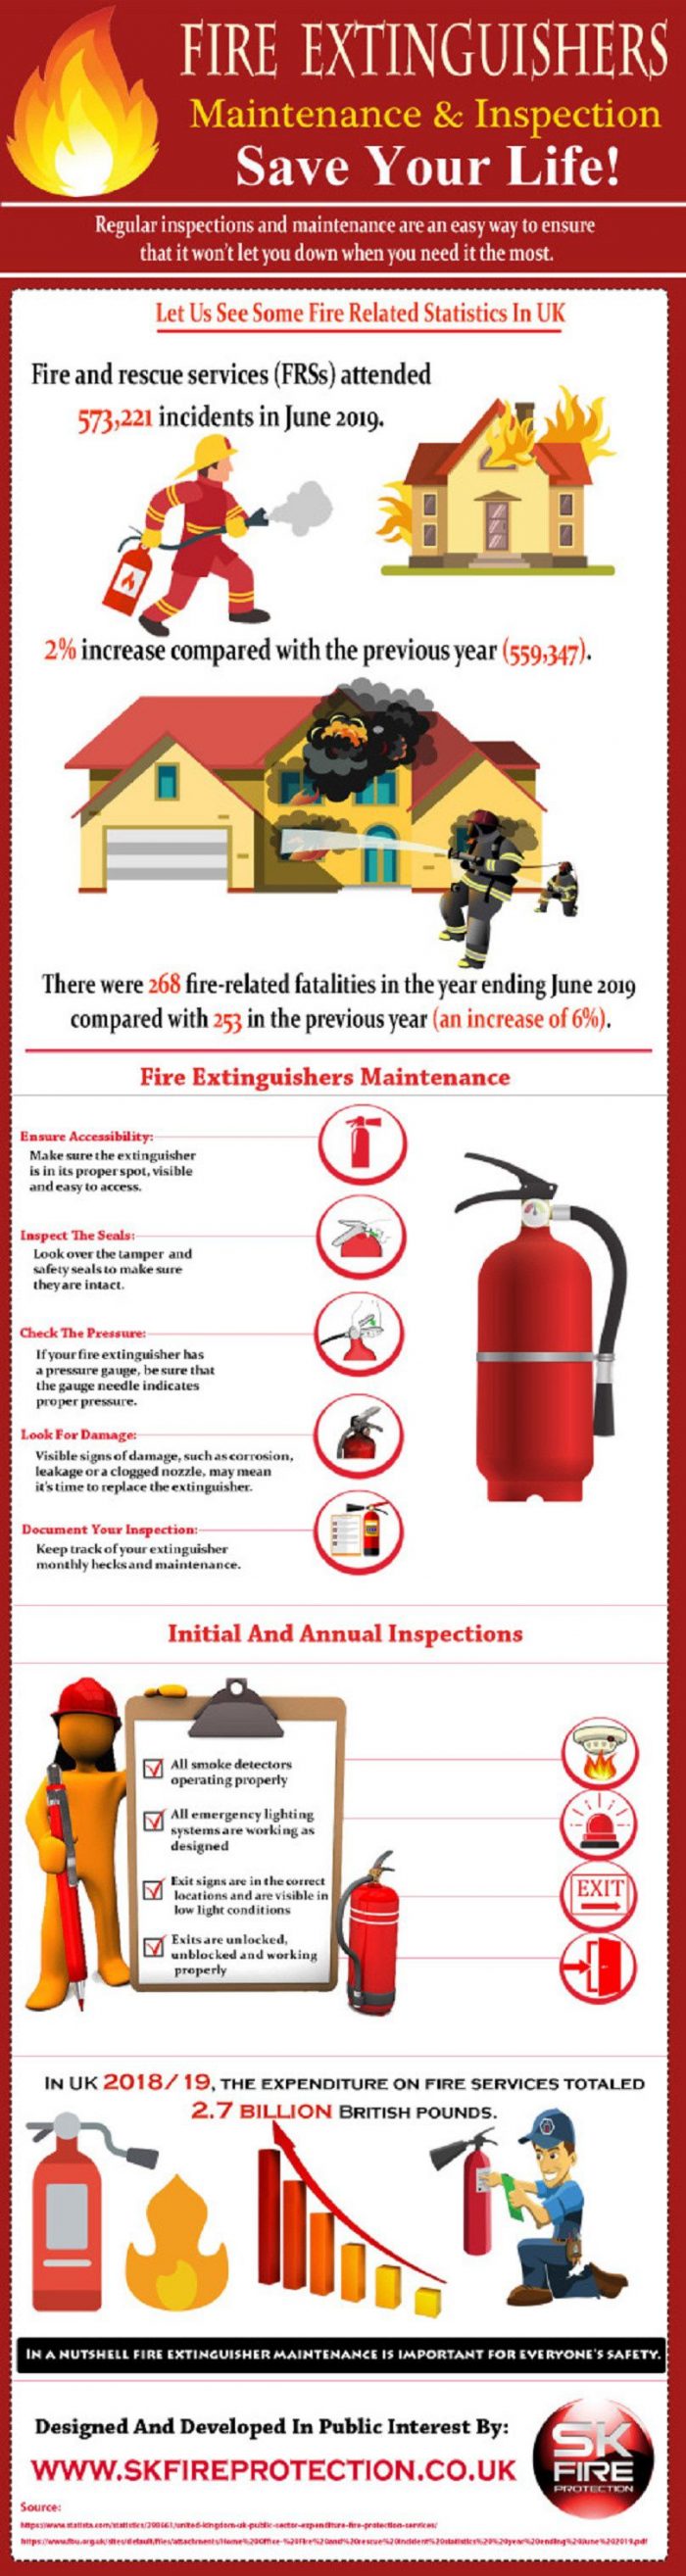 Fire Extinguishers Maintenance & Inspection Save Your Life